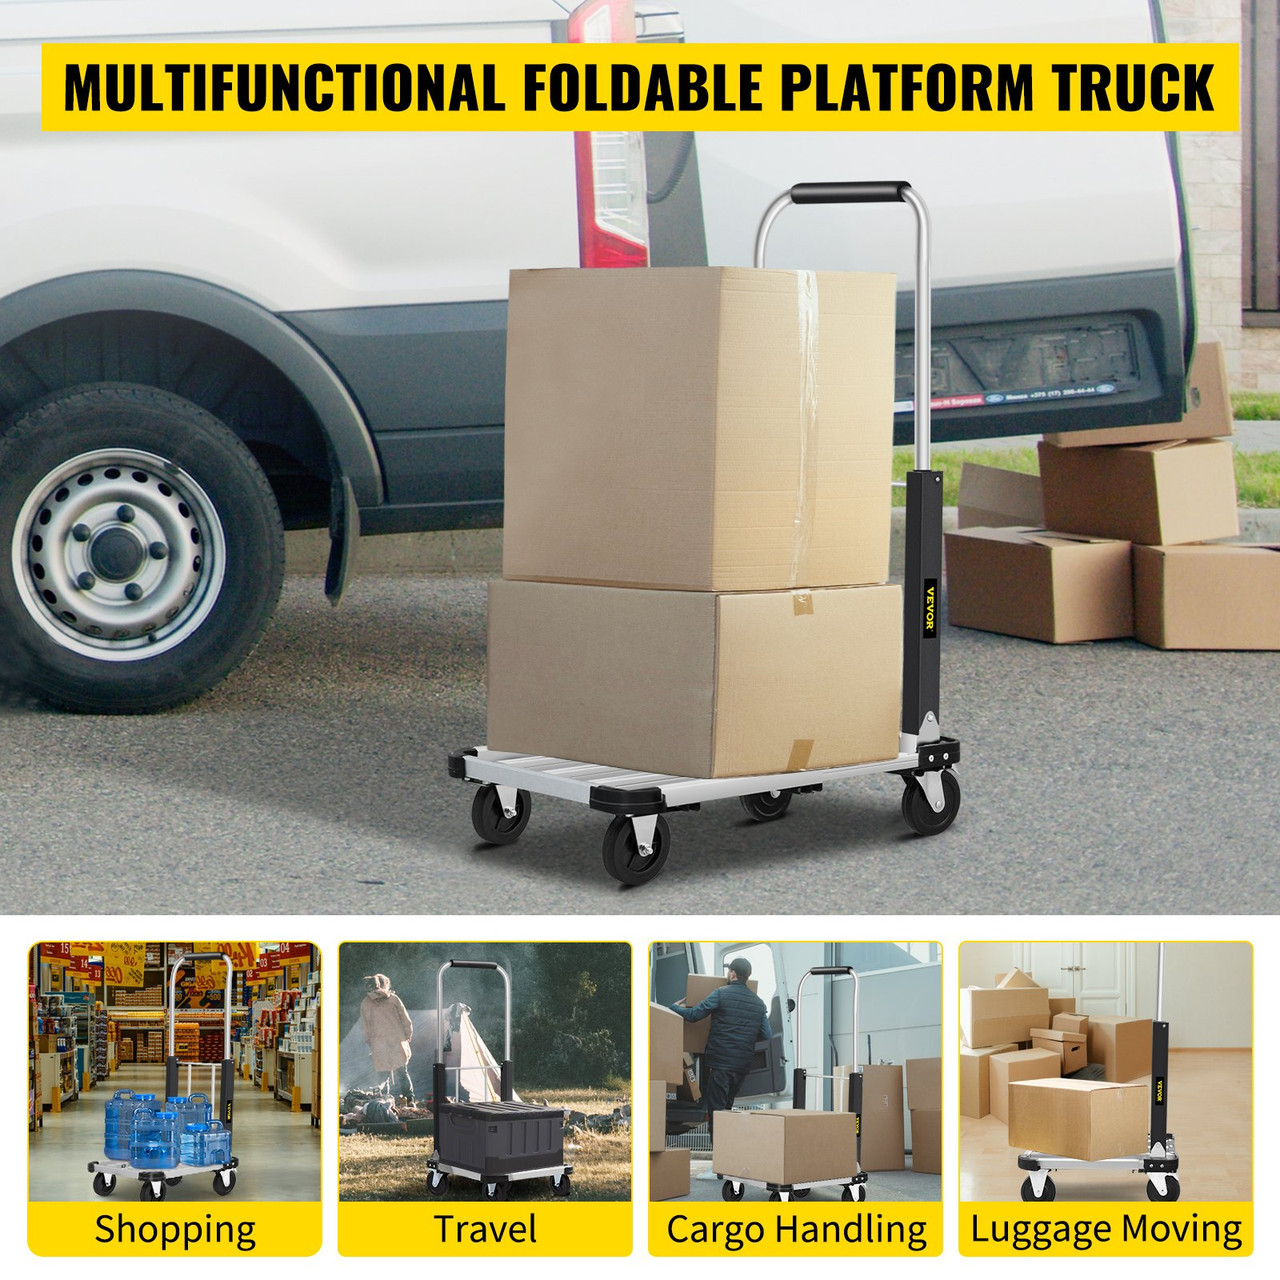 Folding Hand Truck Dolly Cart with Wheels Luggage Cart Trolley Moving 330 lbs